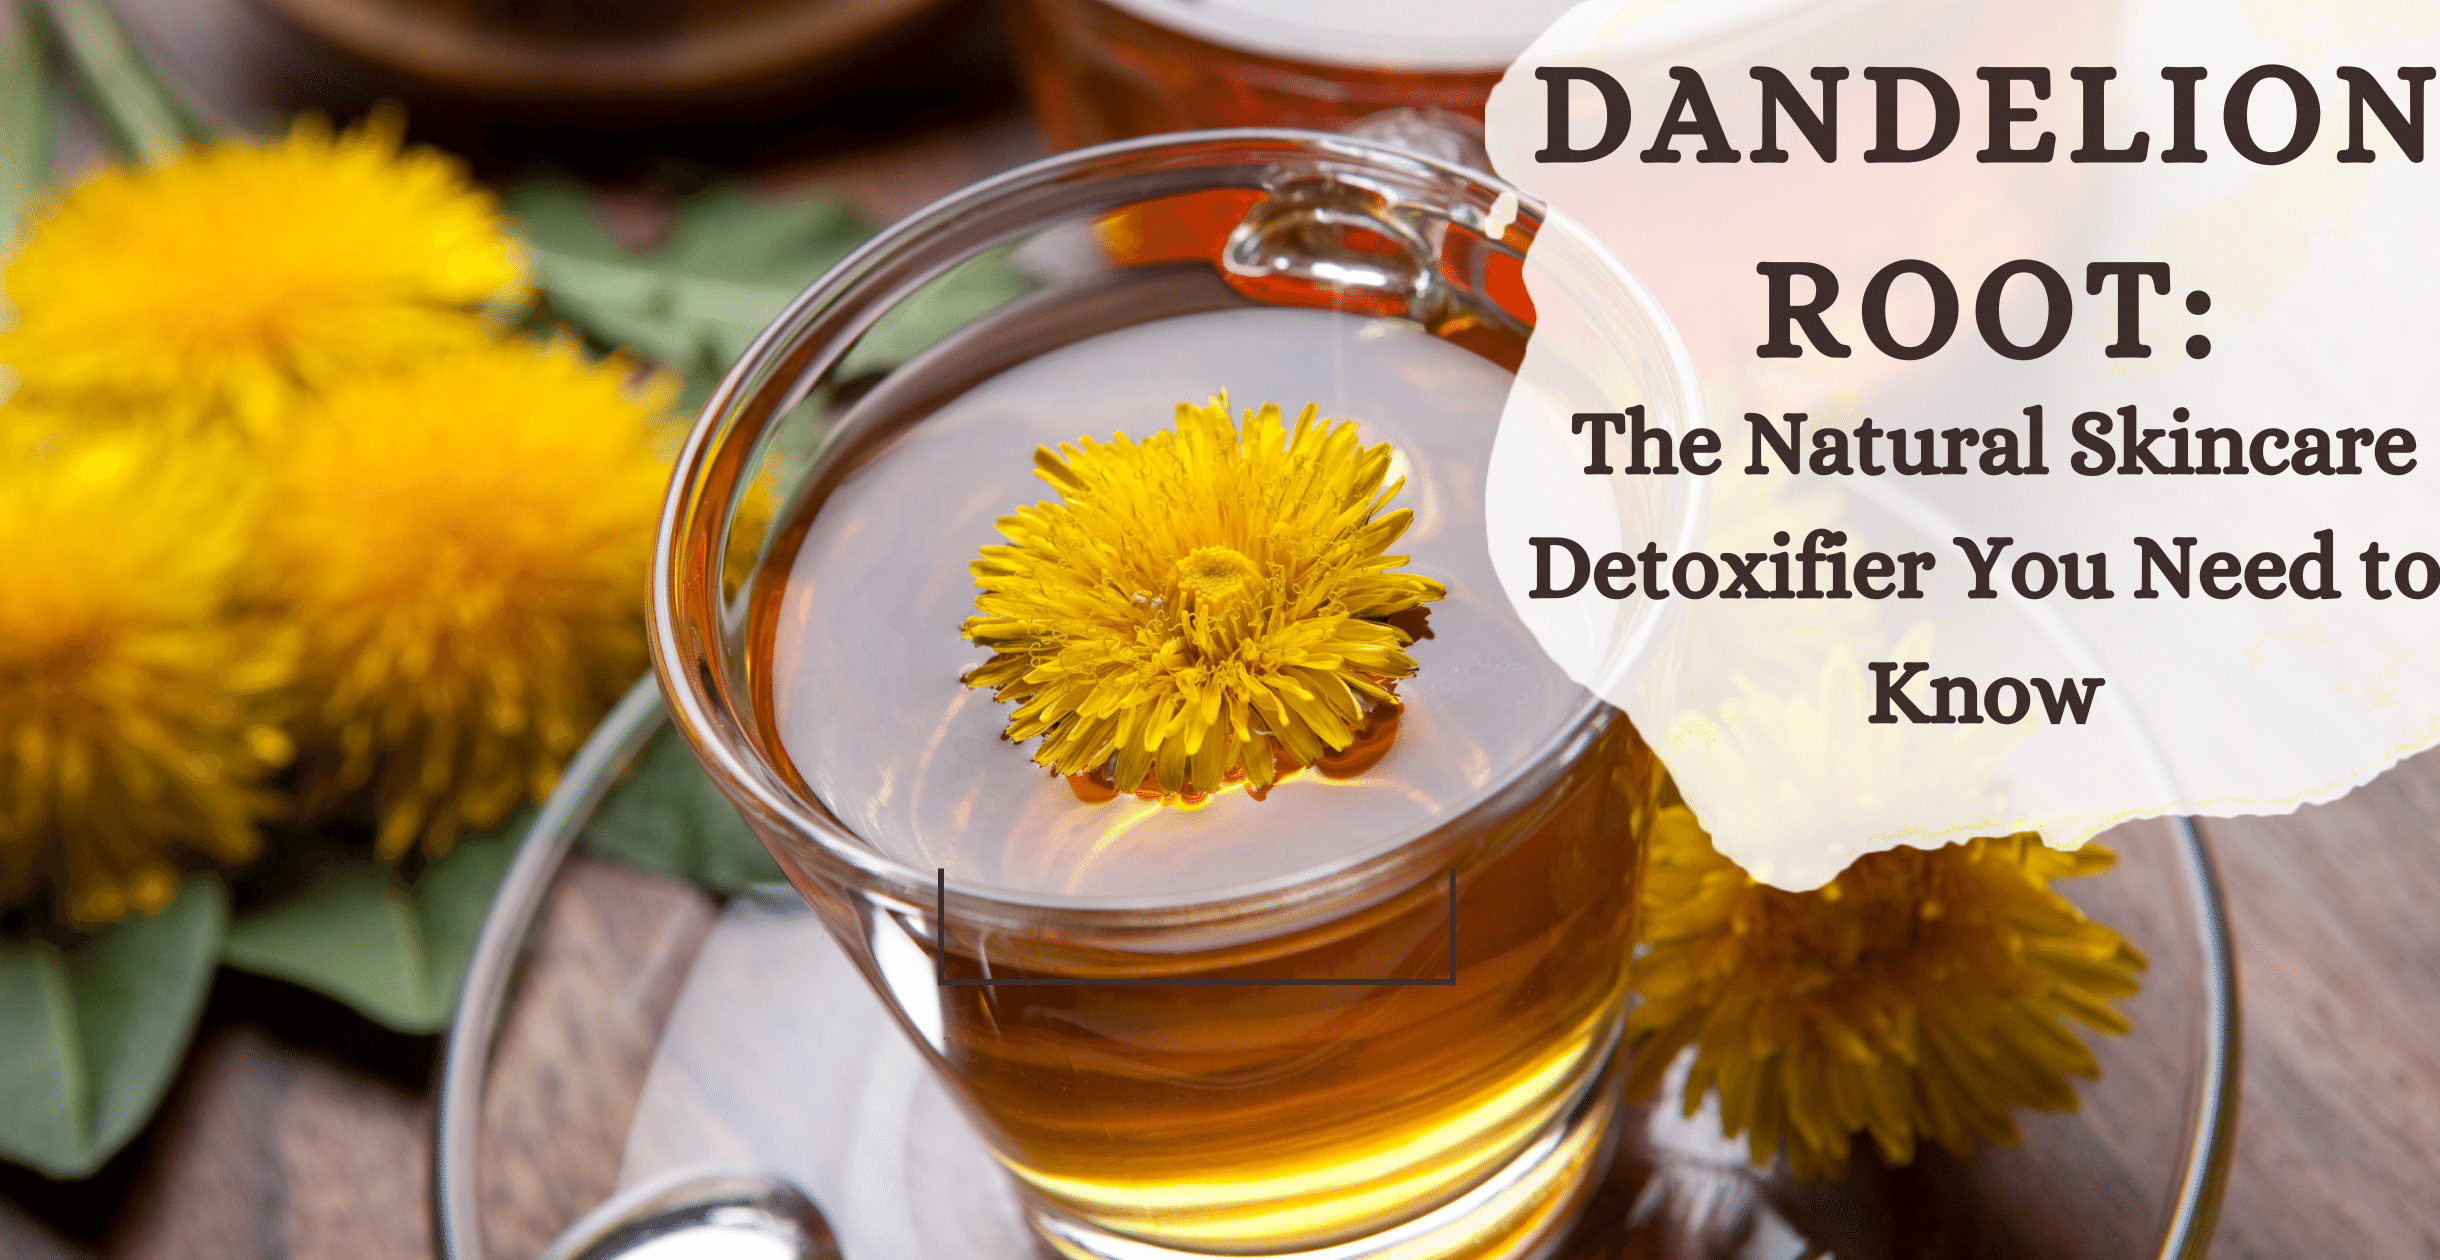 Dandelion Root: The Natural Skincare Detoxifier You Need to Know